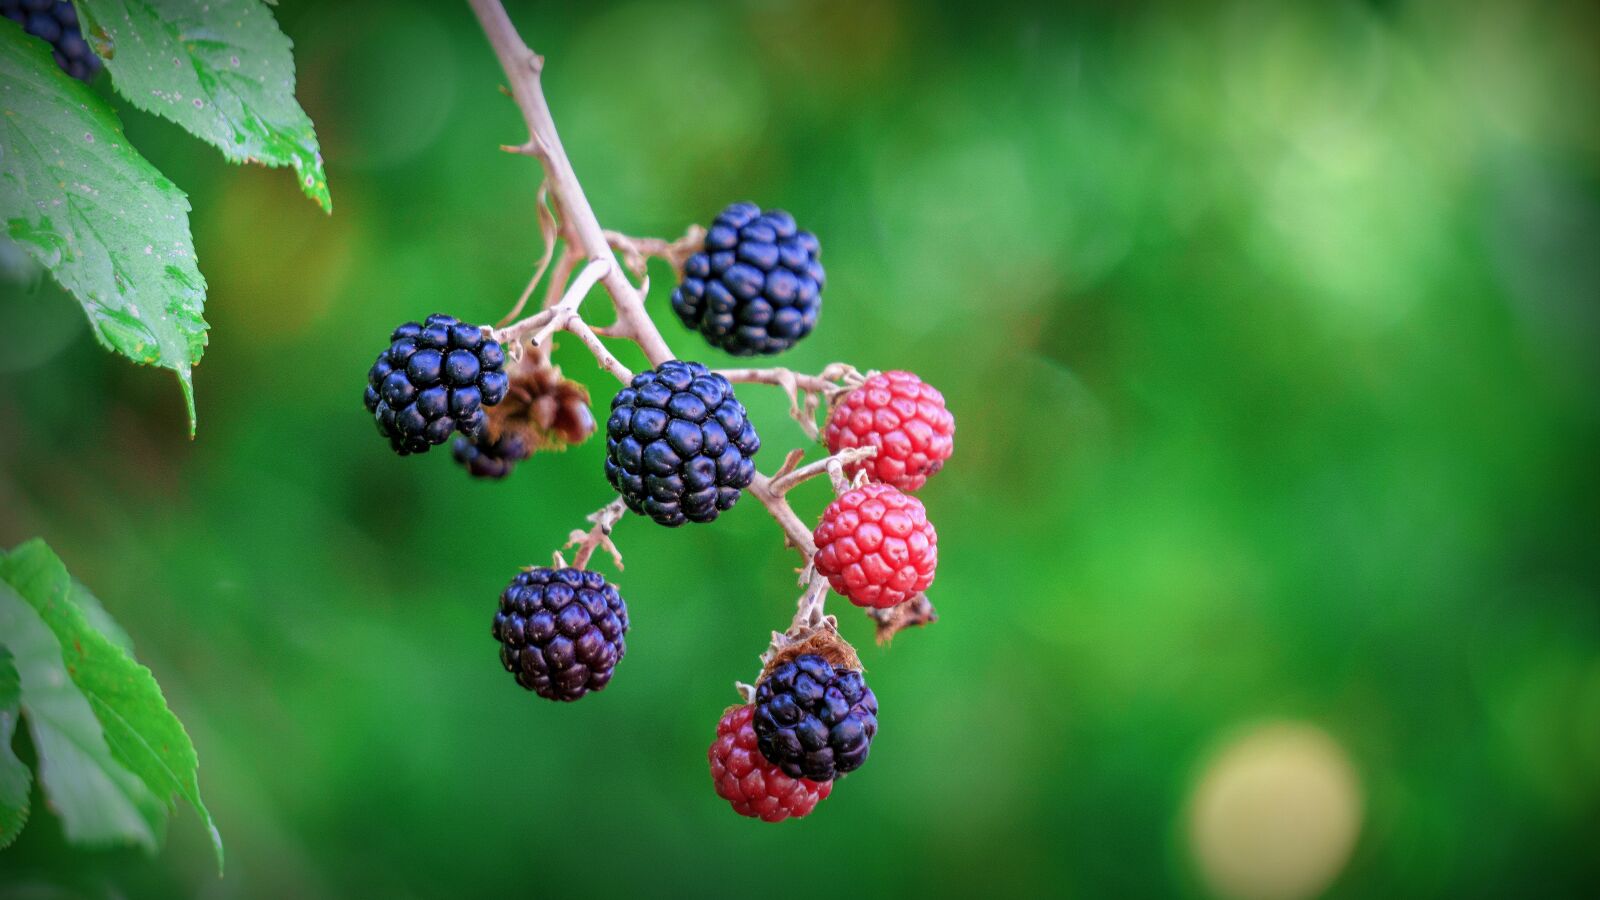 Sony a6000 sample photo. Blackberries, berries, fruit photography